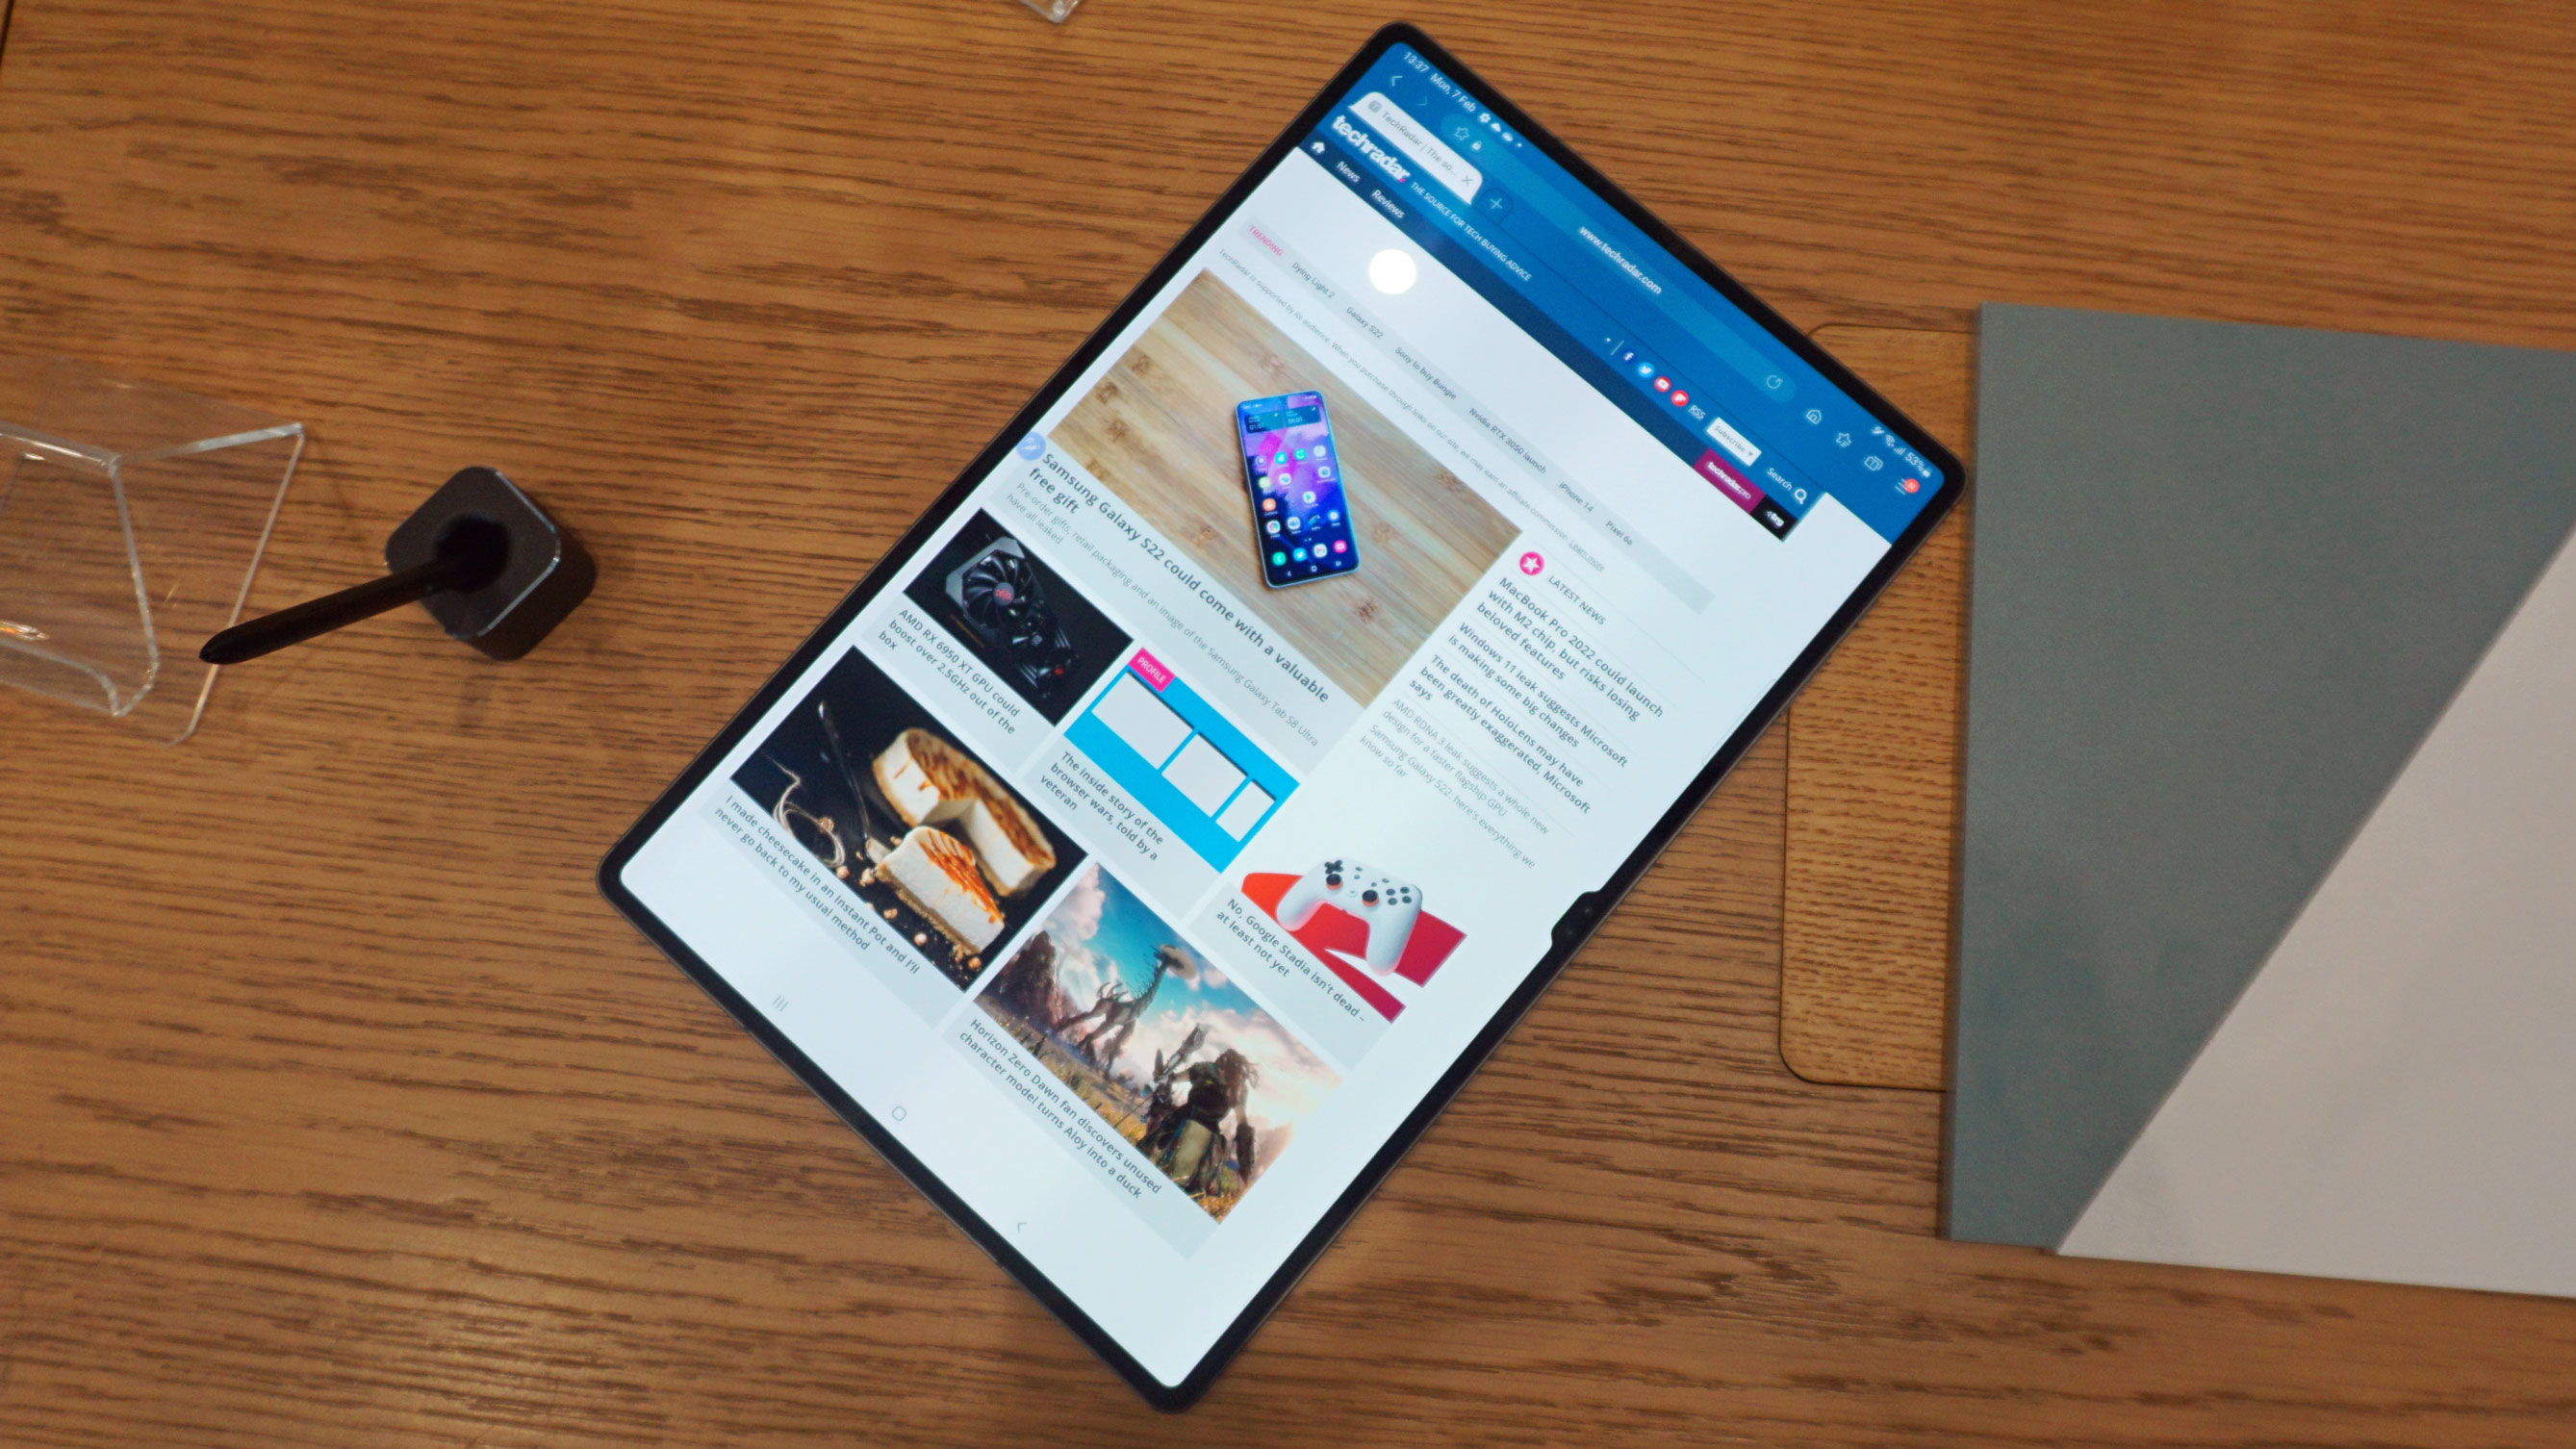 Samsung Galaxy Tab S8 Ultra review: Stunning hardware, but Android